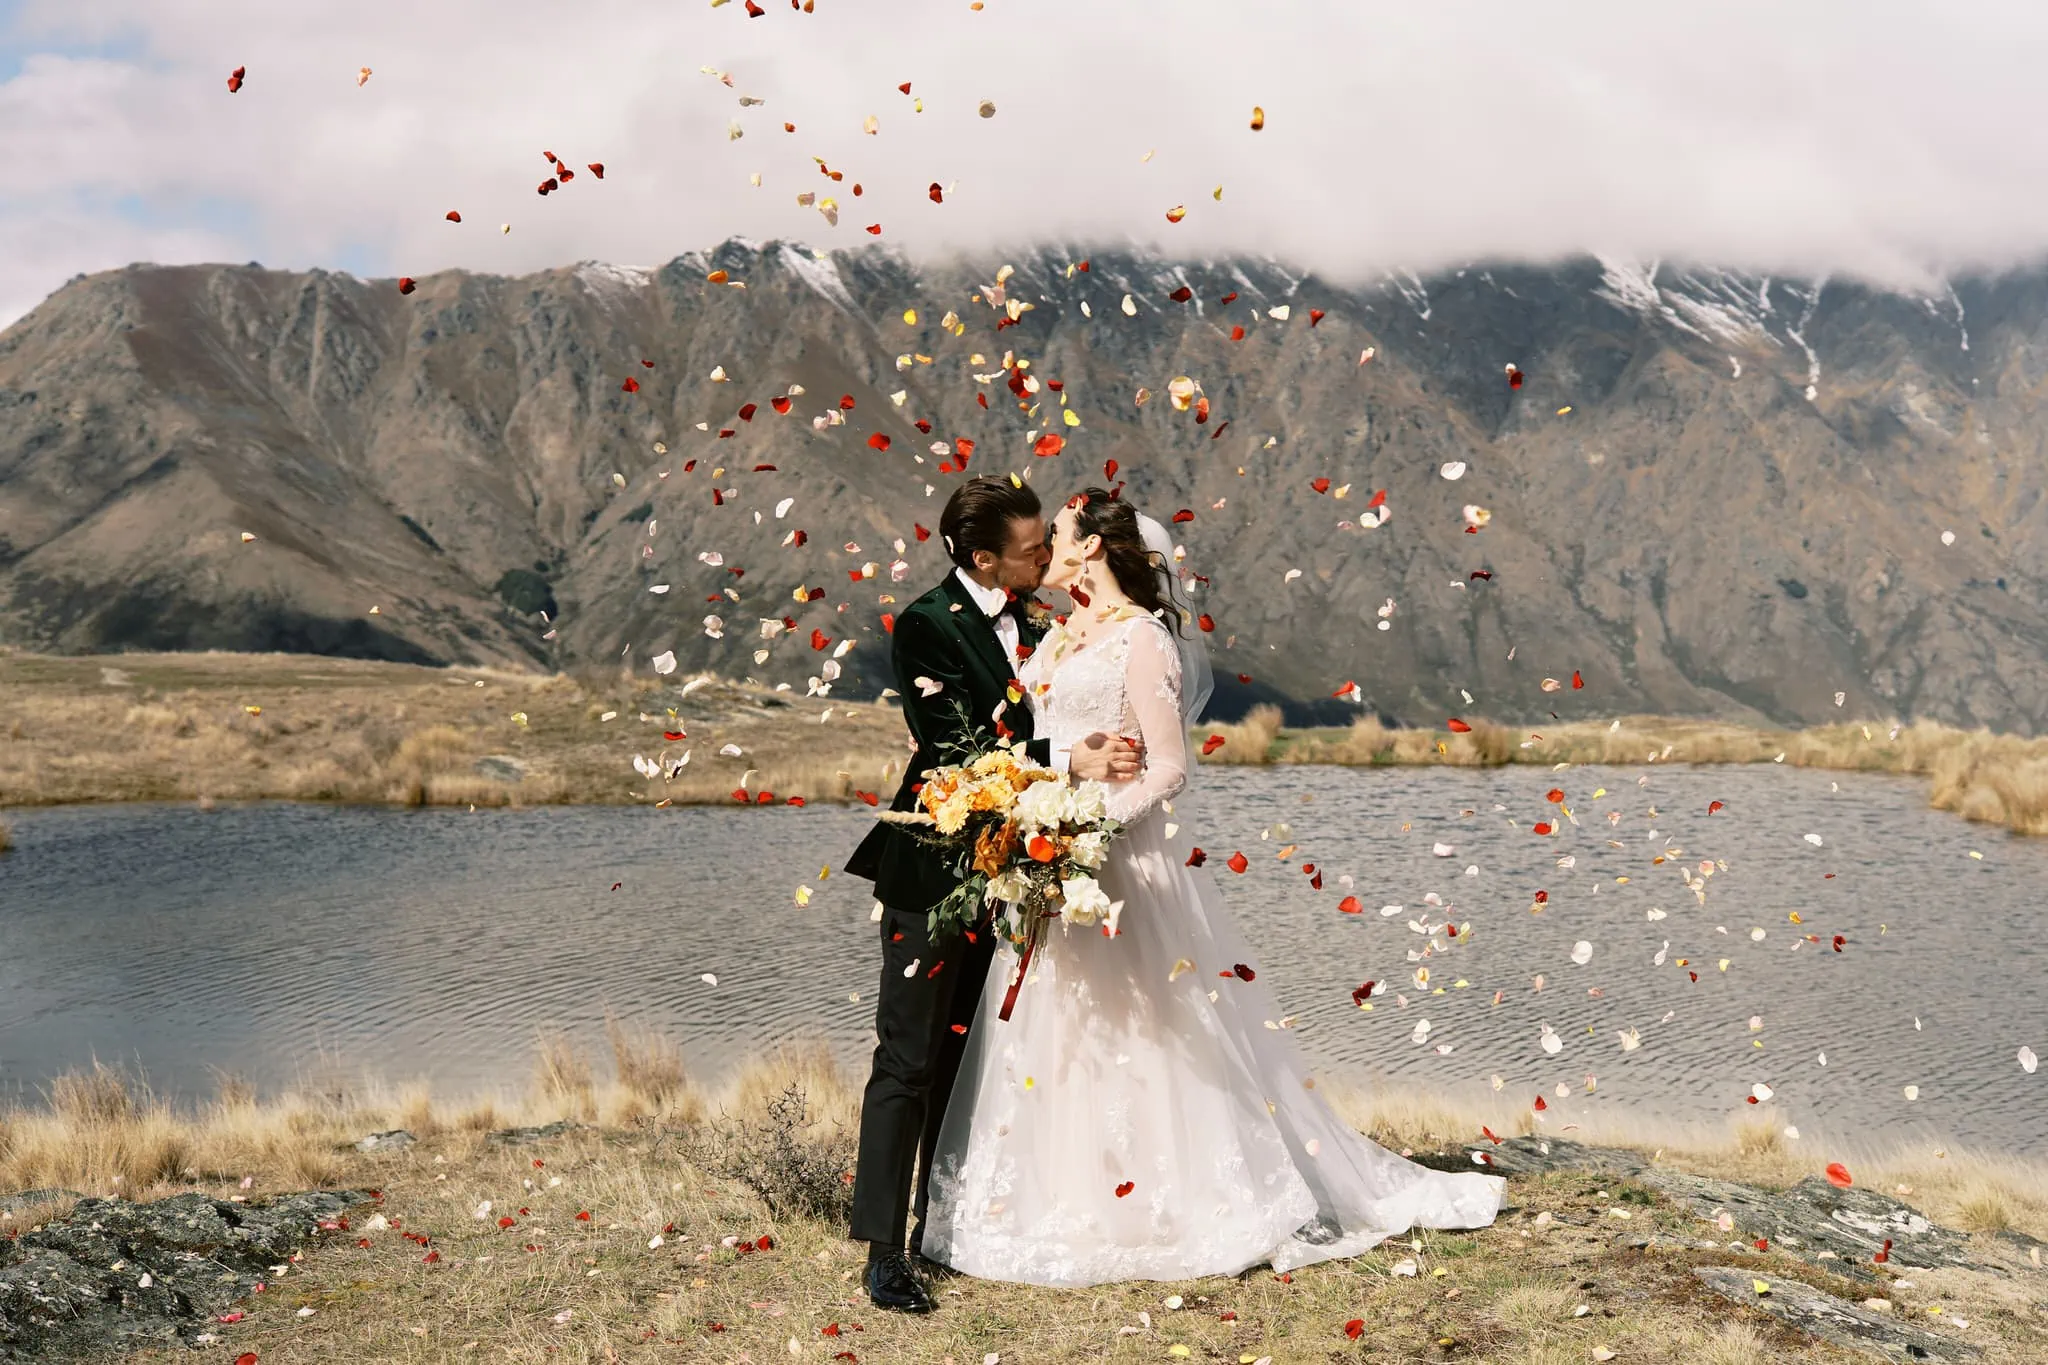 Queenstown New Zealand Elopement Wedding Photographer - Josh Yates - Portfolio: A bride and groom kiss in front of a lake with confetti falling around them.